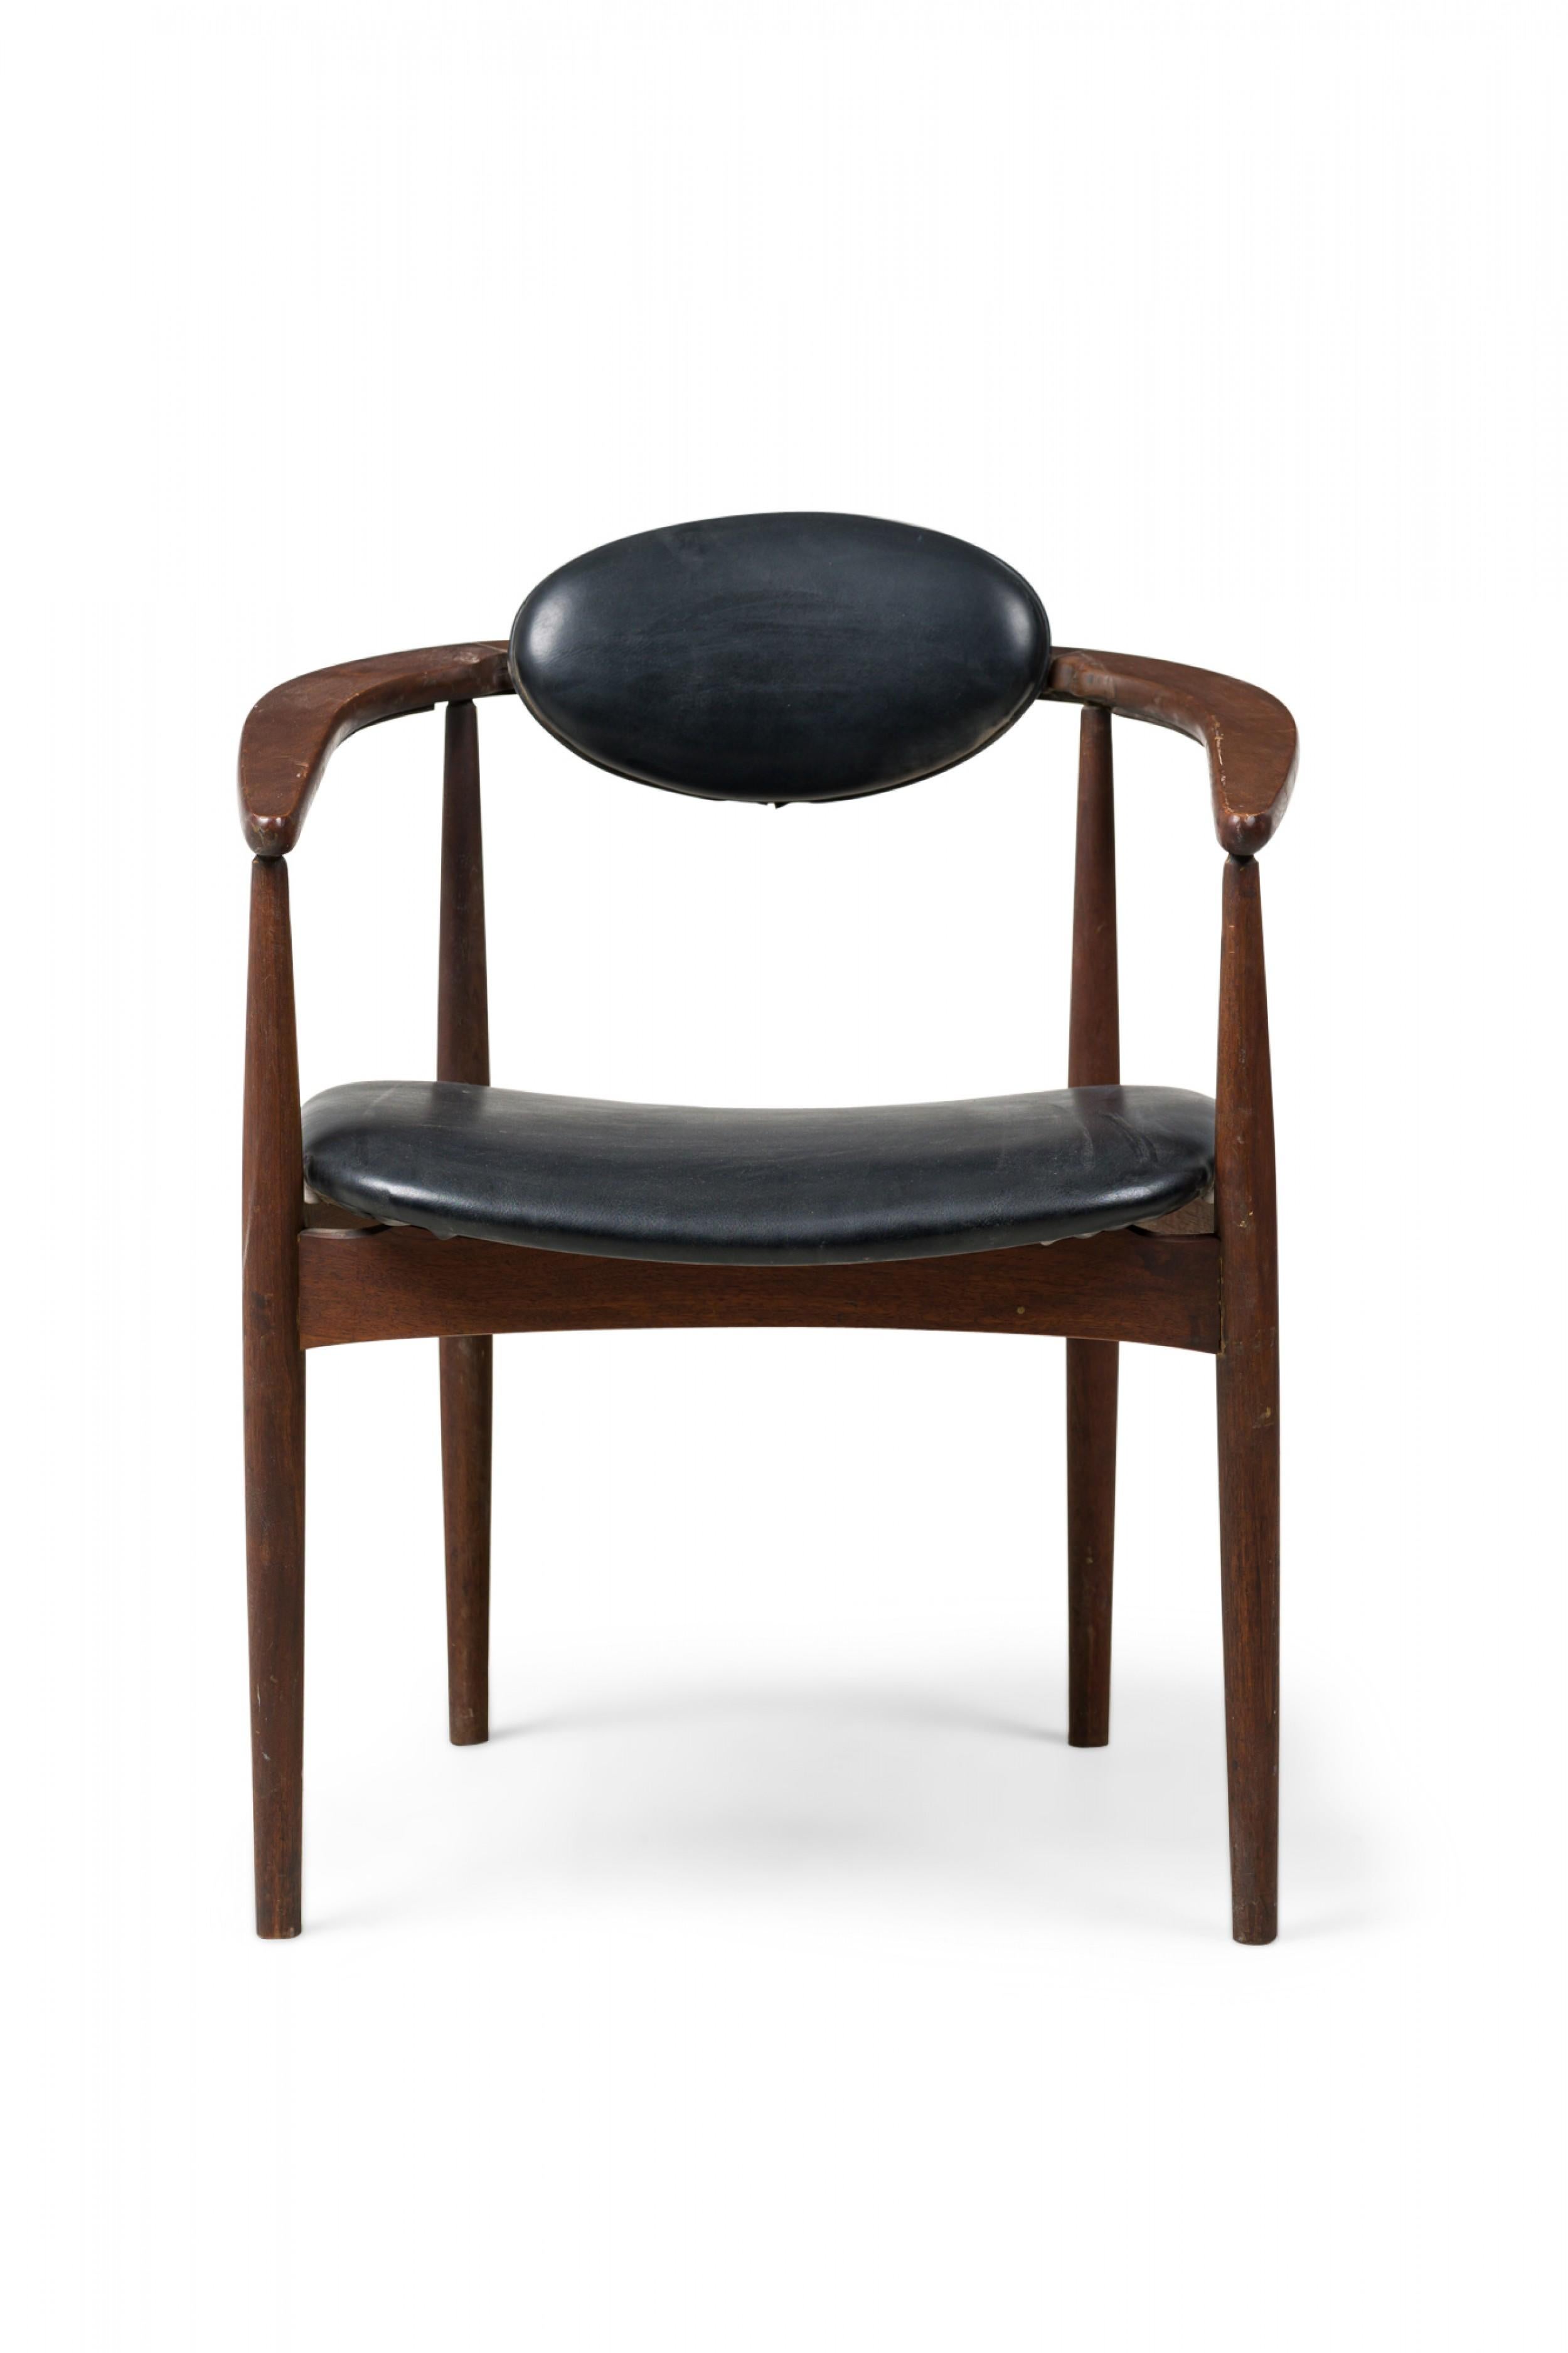 SET of 3 midcentury Danish Modern armchairs featuring horseshoe arms unified with the backrest as one piece, oval backrest and shaped seat upholstered in black leather, standing on 4 tapered cylindrical legs extending to the arms. (in the style of